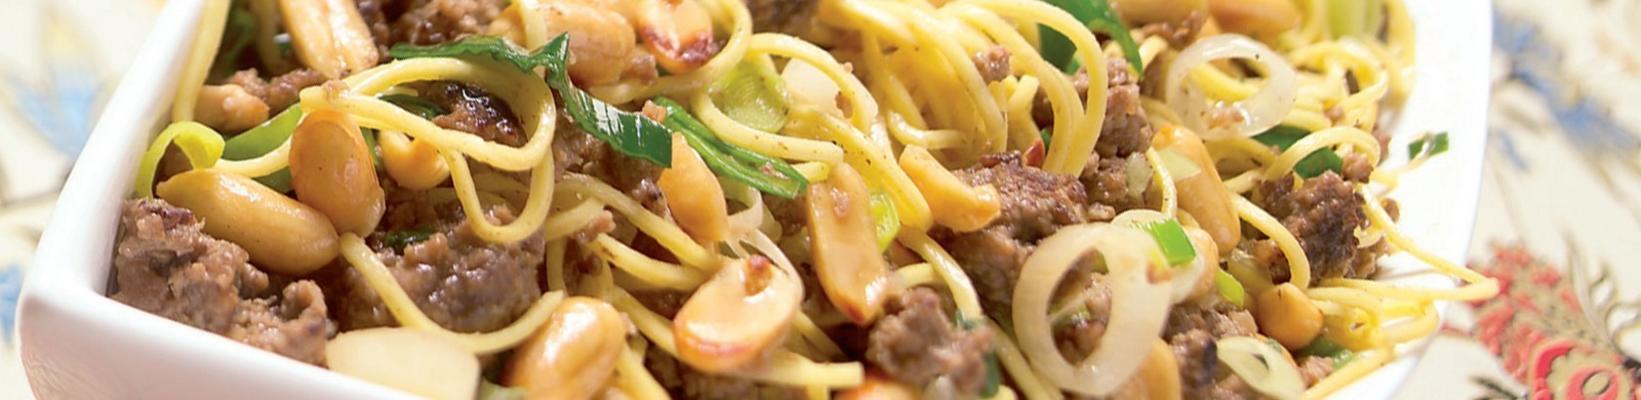 spicy noodles with minced meat